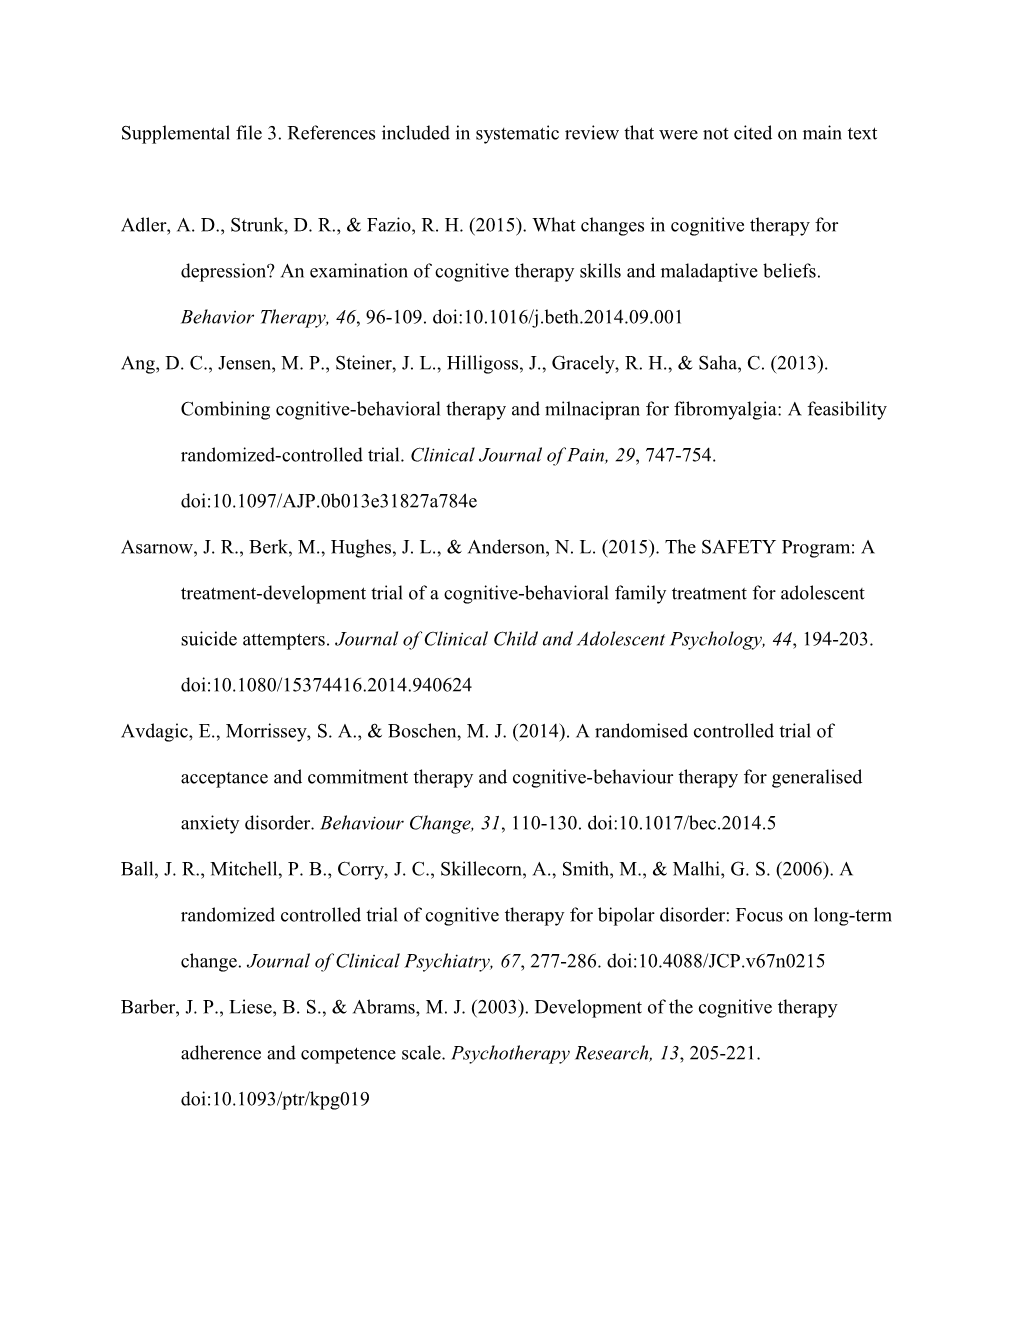 Supplemental File 3. References Included in Systematic Review That Were Not Cited on Main Text